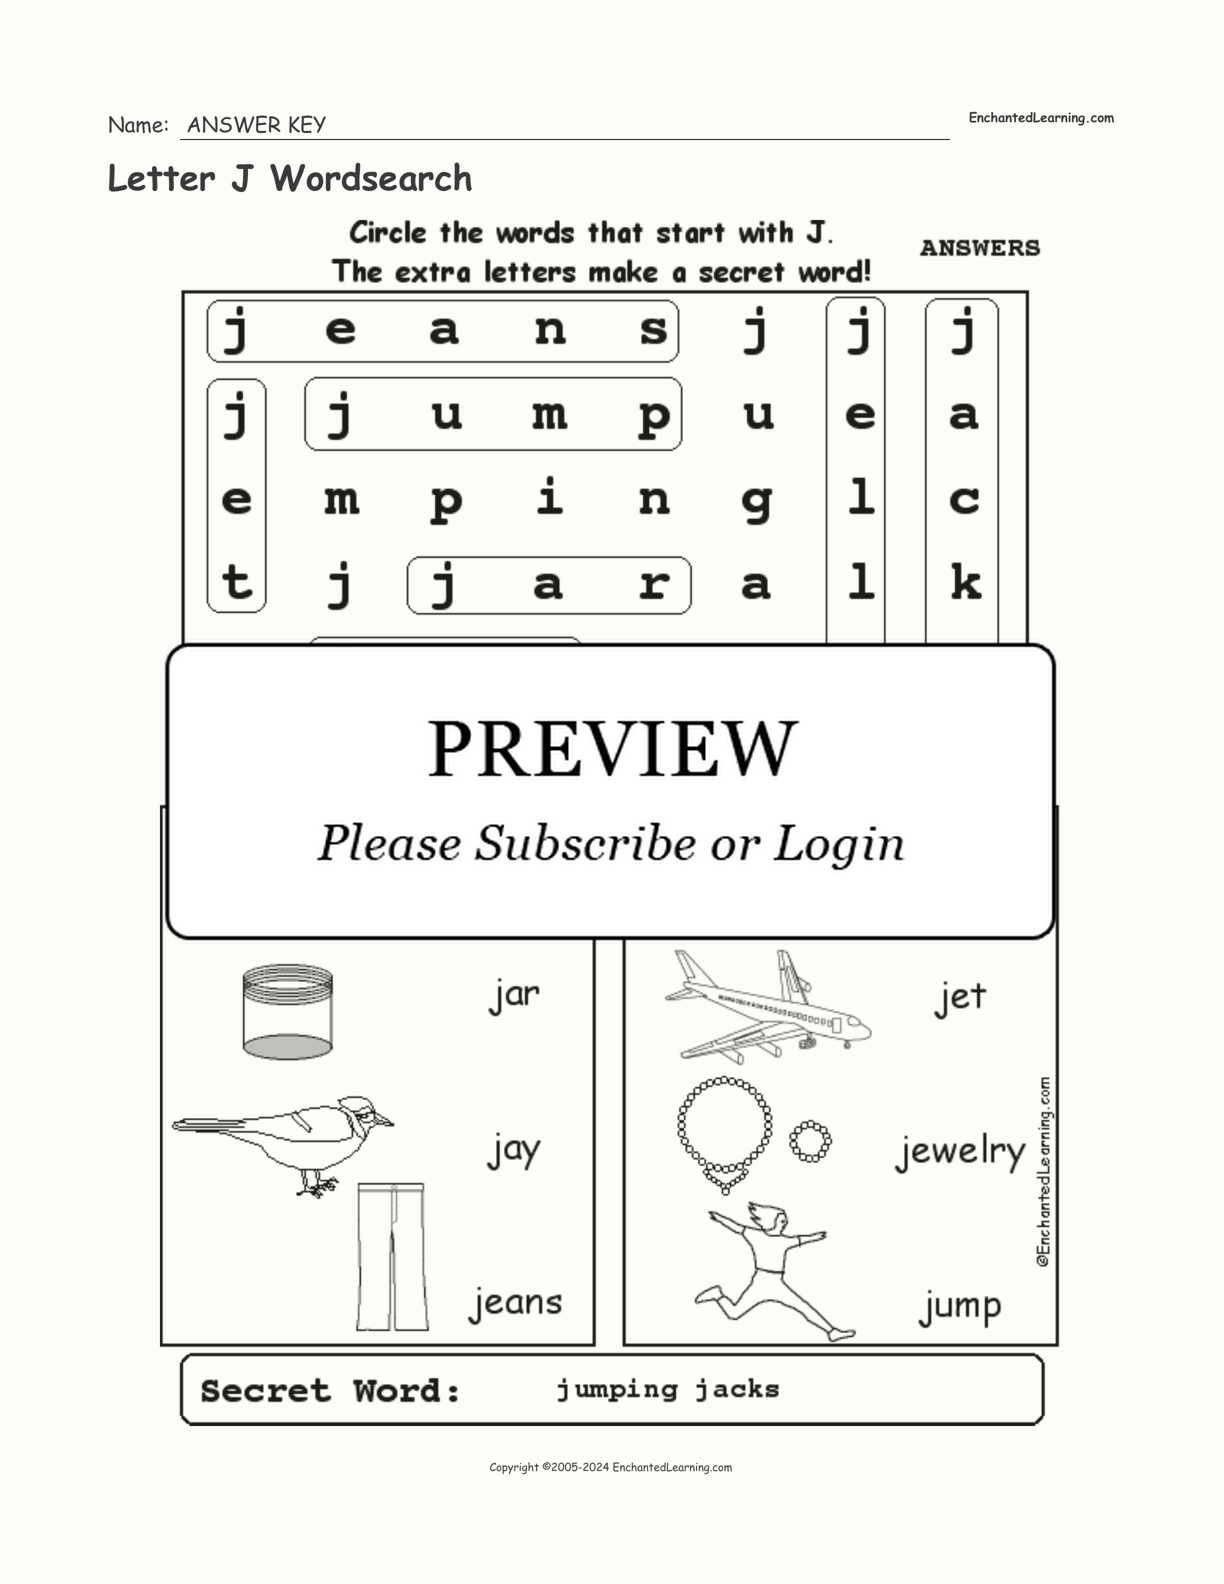 Letter J Wordsearch interactive worksheet page 2